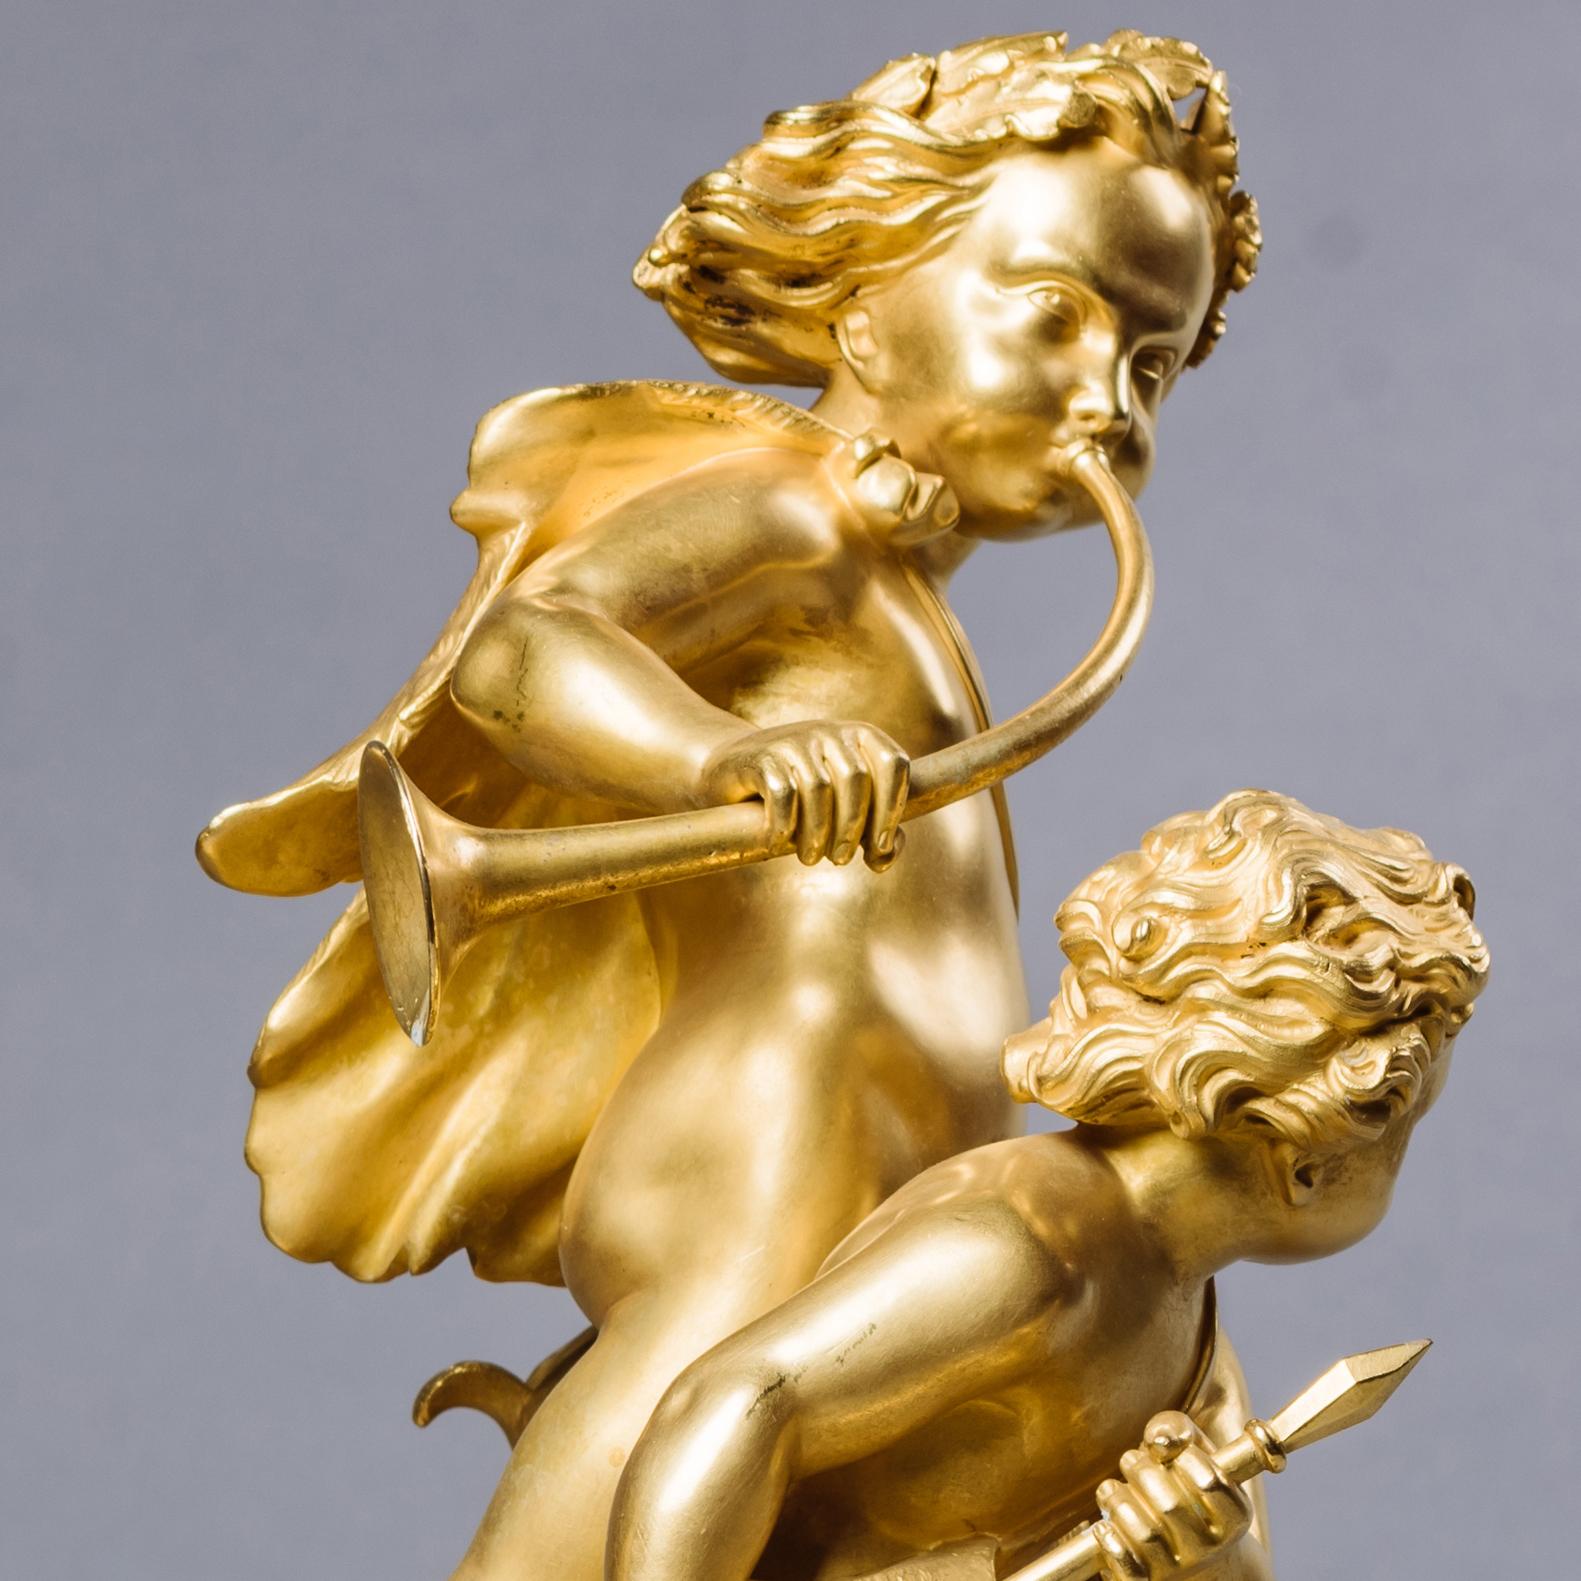 An exceptional pair of restoration period gilt-bronze figural groups, allegorical of hunting and fishing.

Each group is set on a naturalistically modelled base and finely modelled and chiselled with superb matte and burnished gilding. The first